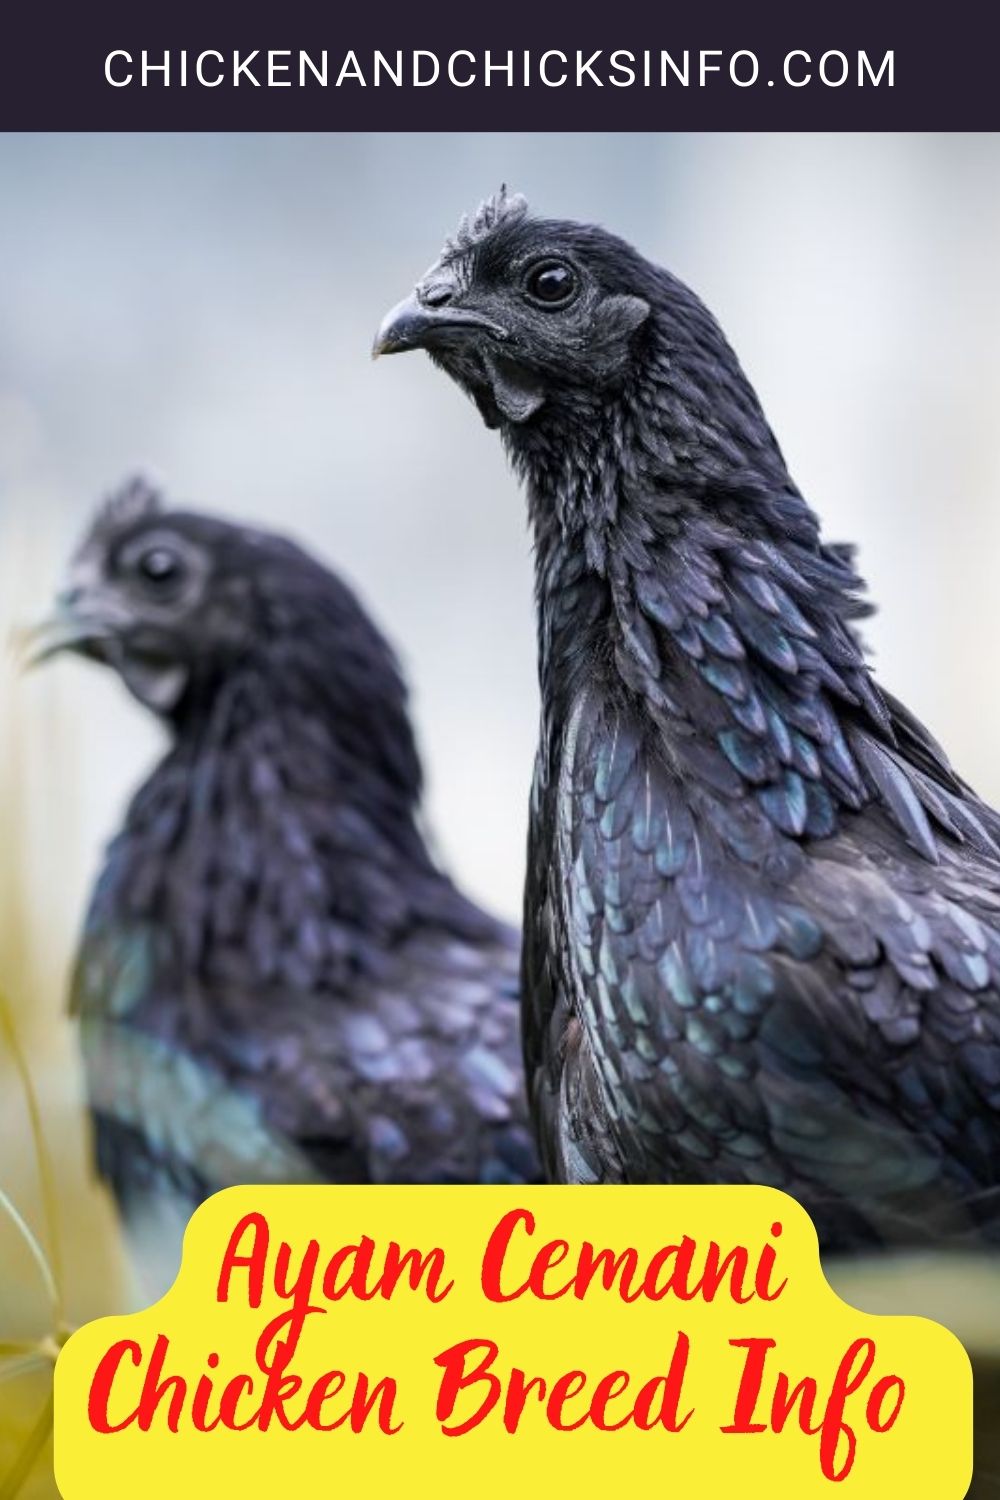 Ayam Cemani Chicken Breed Info + Where to Buy pinterest image.